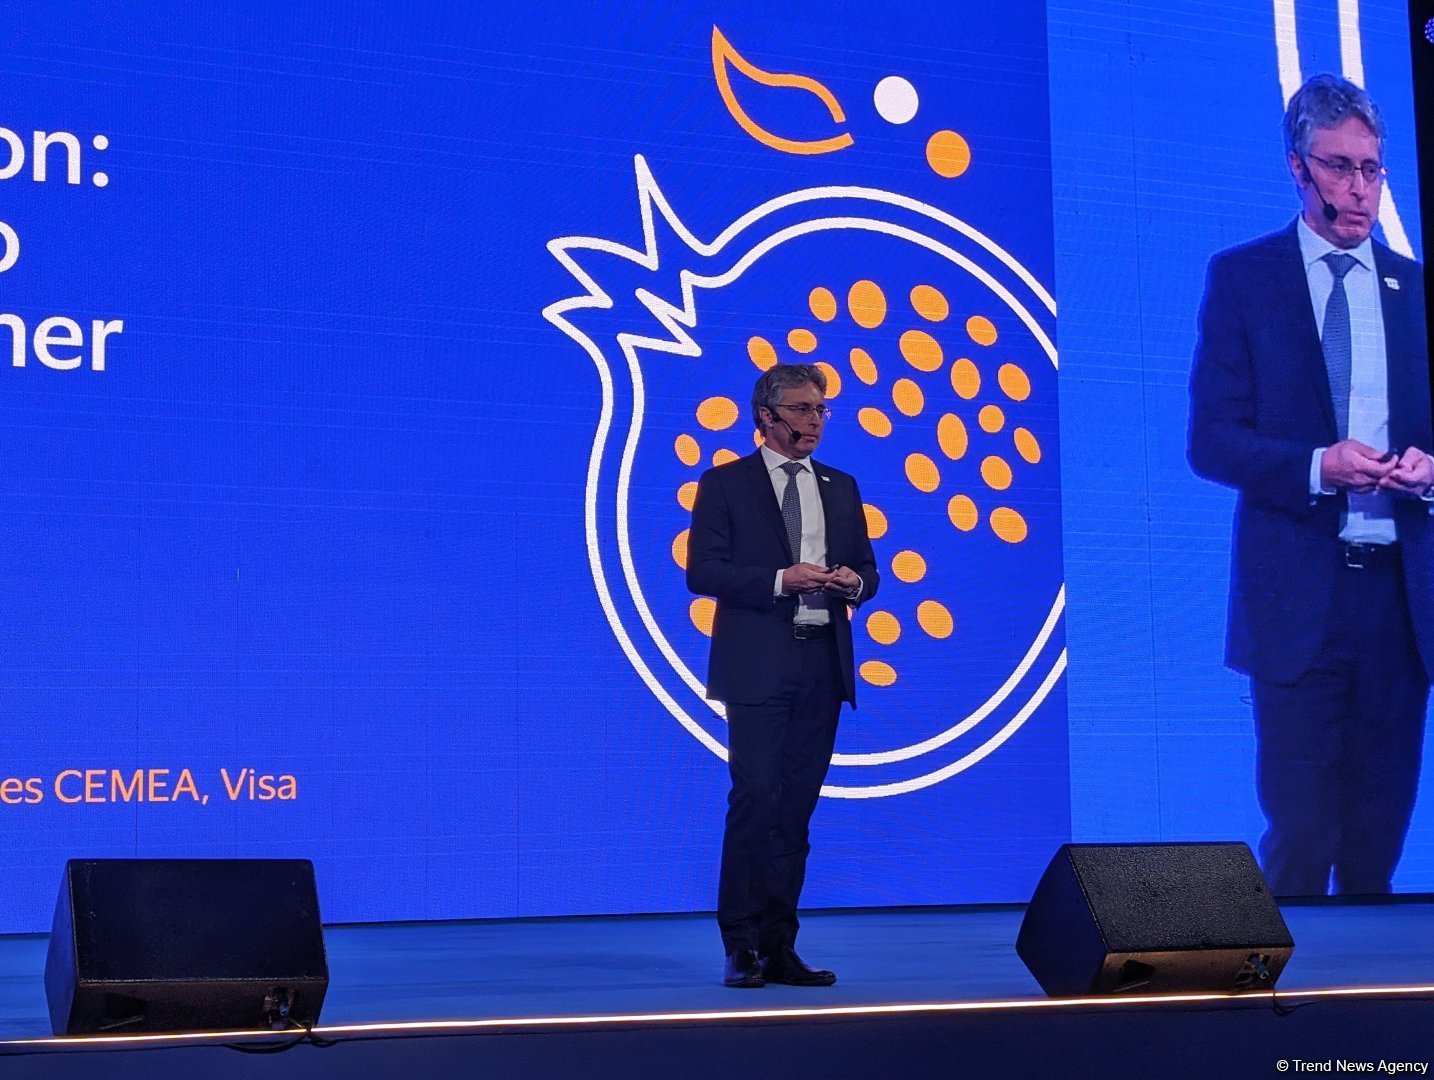 Digital payments account for more than half of Visa's payments in CEMEA region - senior vice president